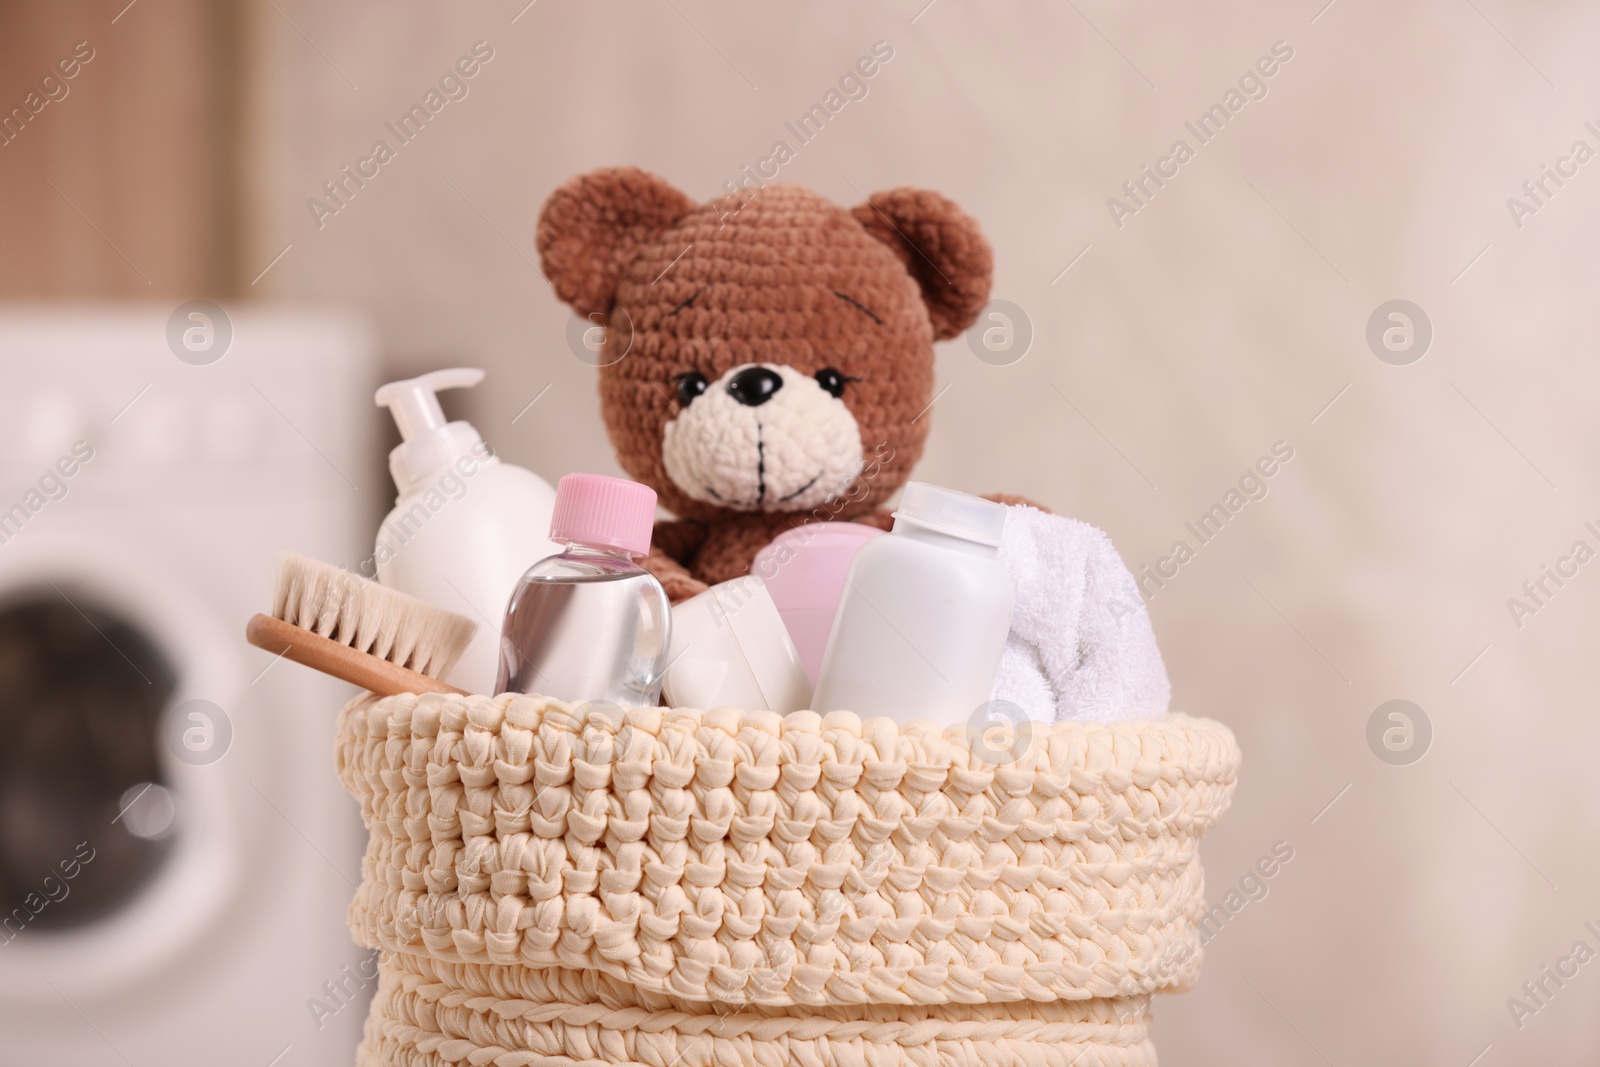 Photo of Baby cosmetic products, bath accessories and toy bear in knitted basket indoors, closeup